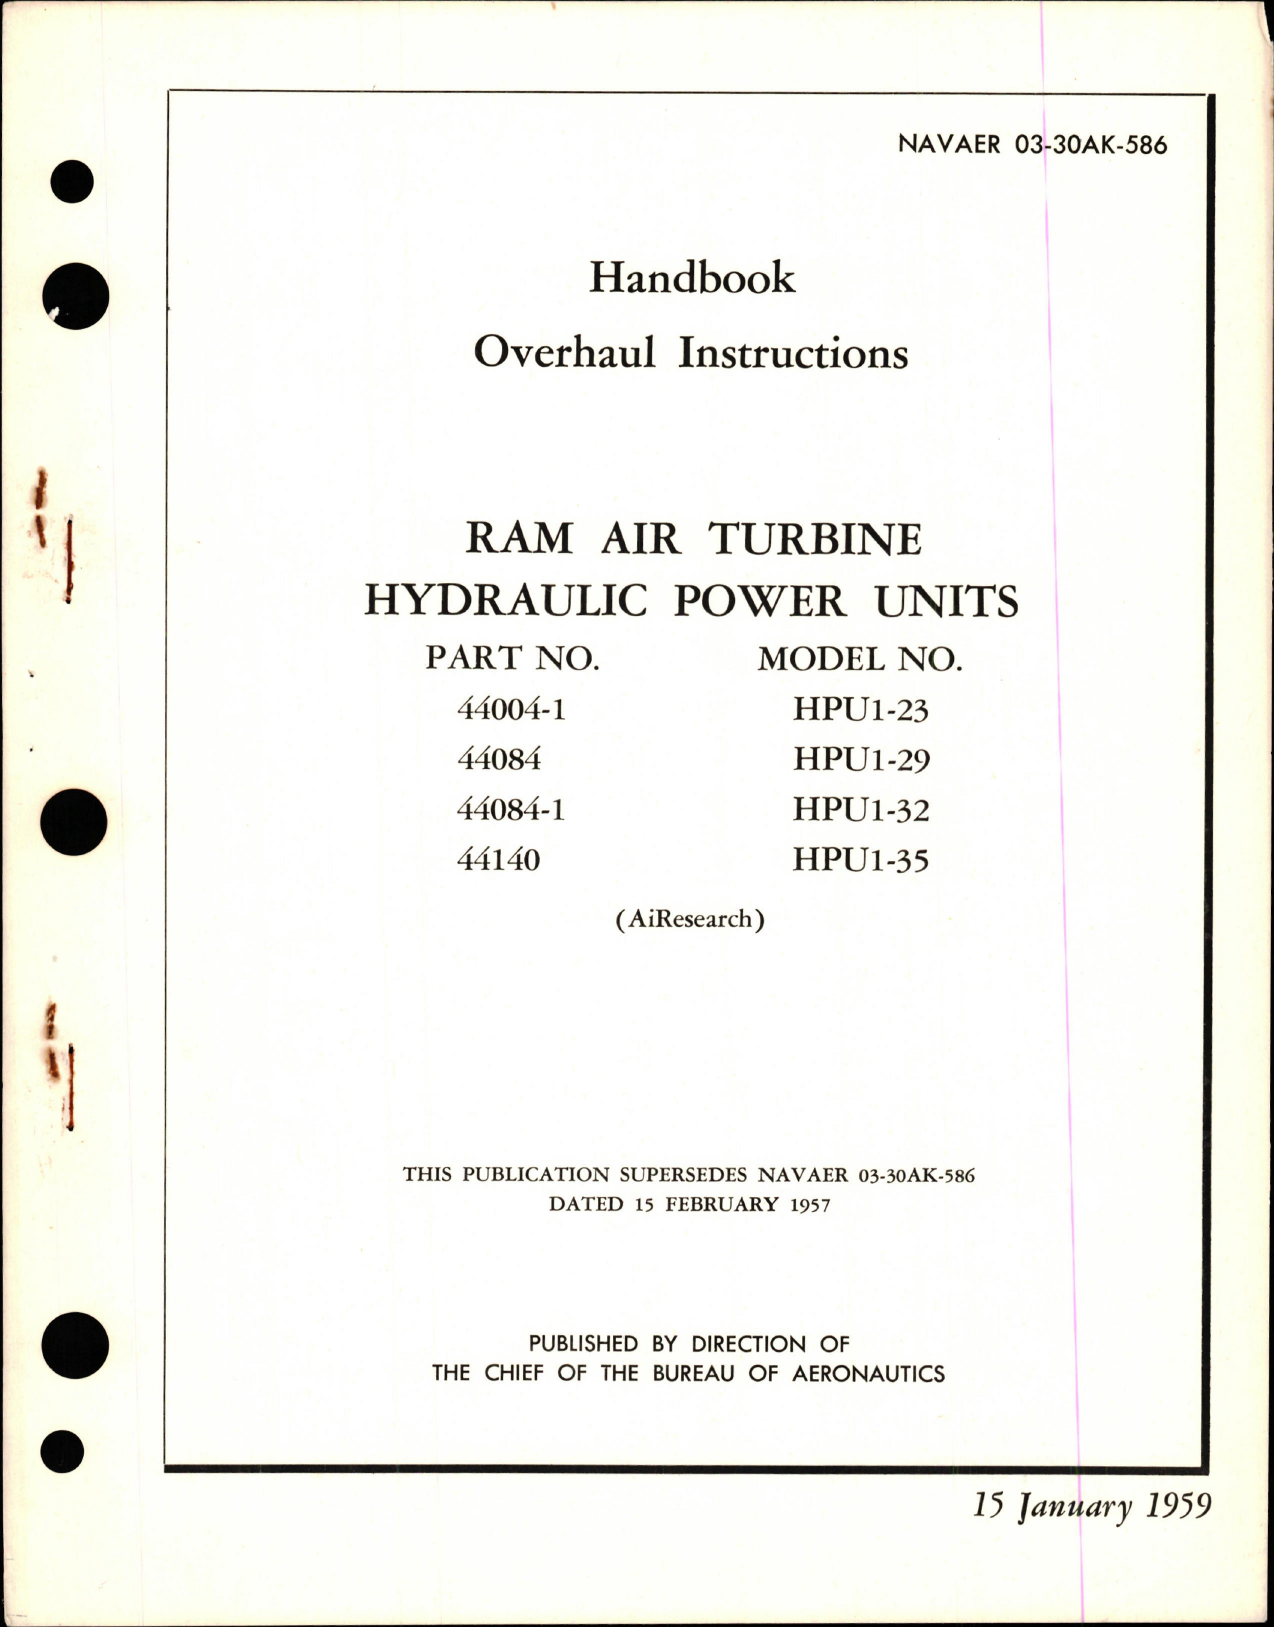 Sample page 1 from AirCorps Library document: Overhaul Instructions for Ram Air Turbine Hydraulic Power Units - Parts 44004-1, 44084, 44084-1, and 44140 